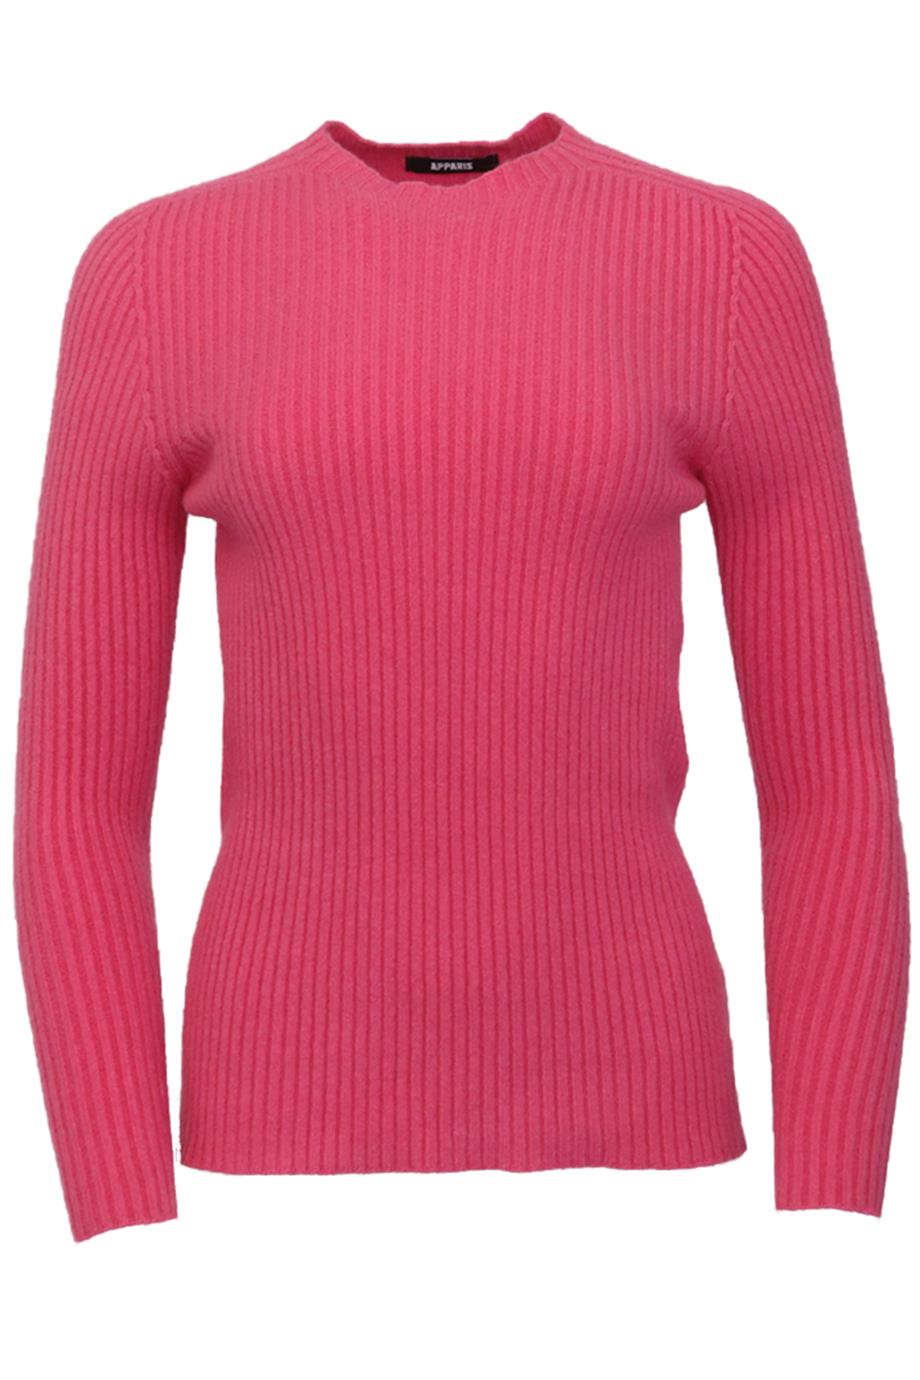 APPARIS RIBBED KNIT SWEATER SMALL